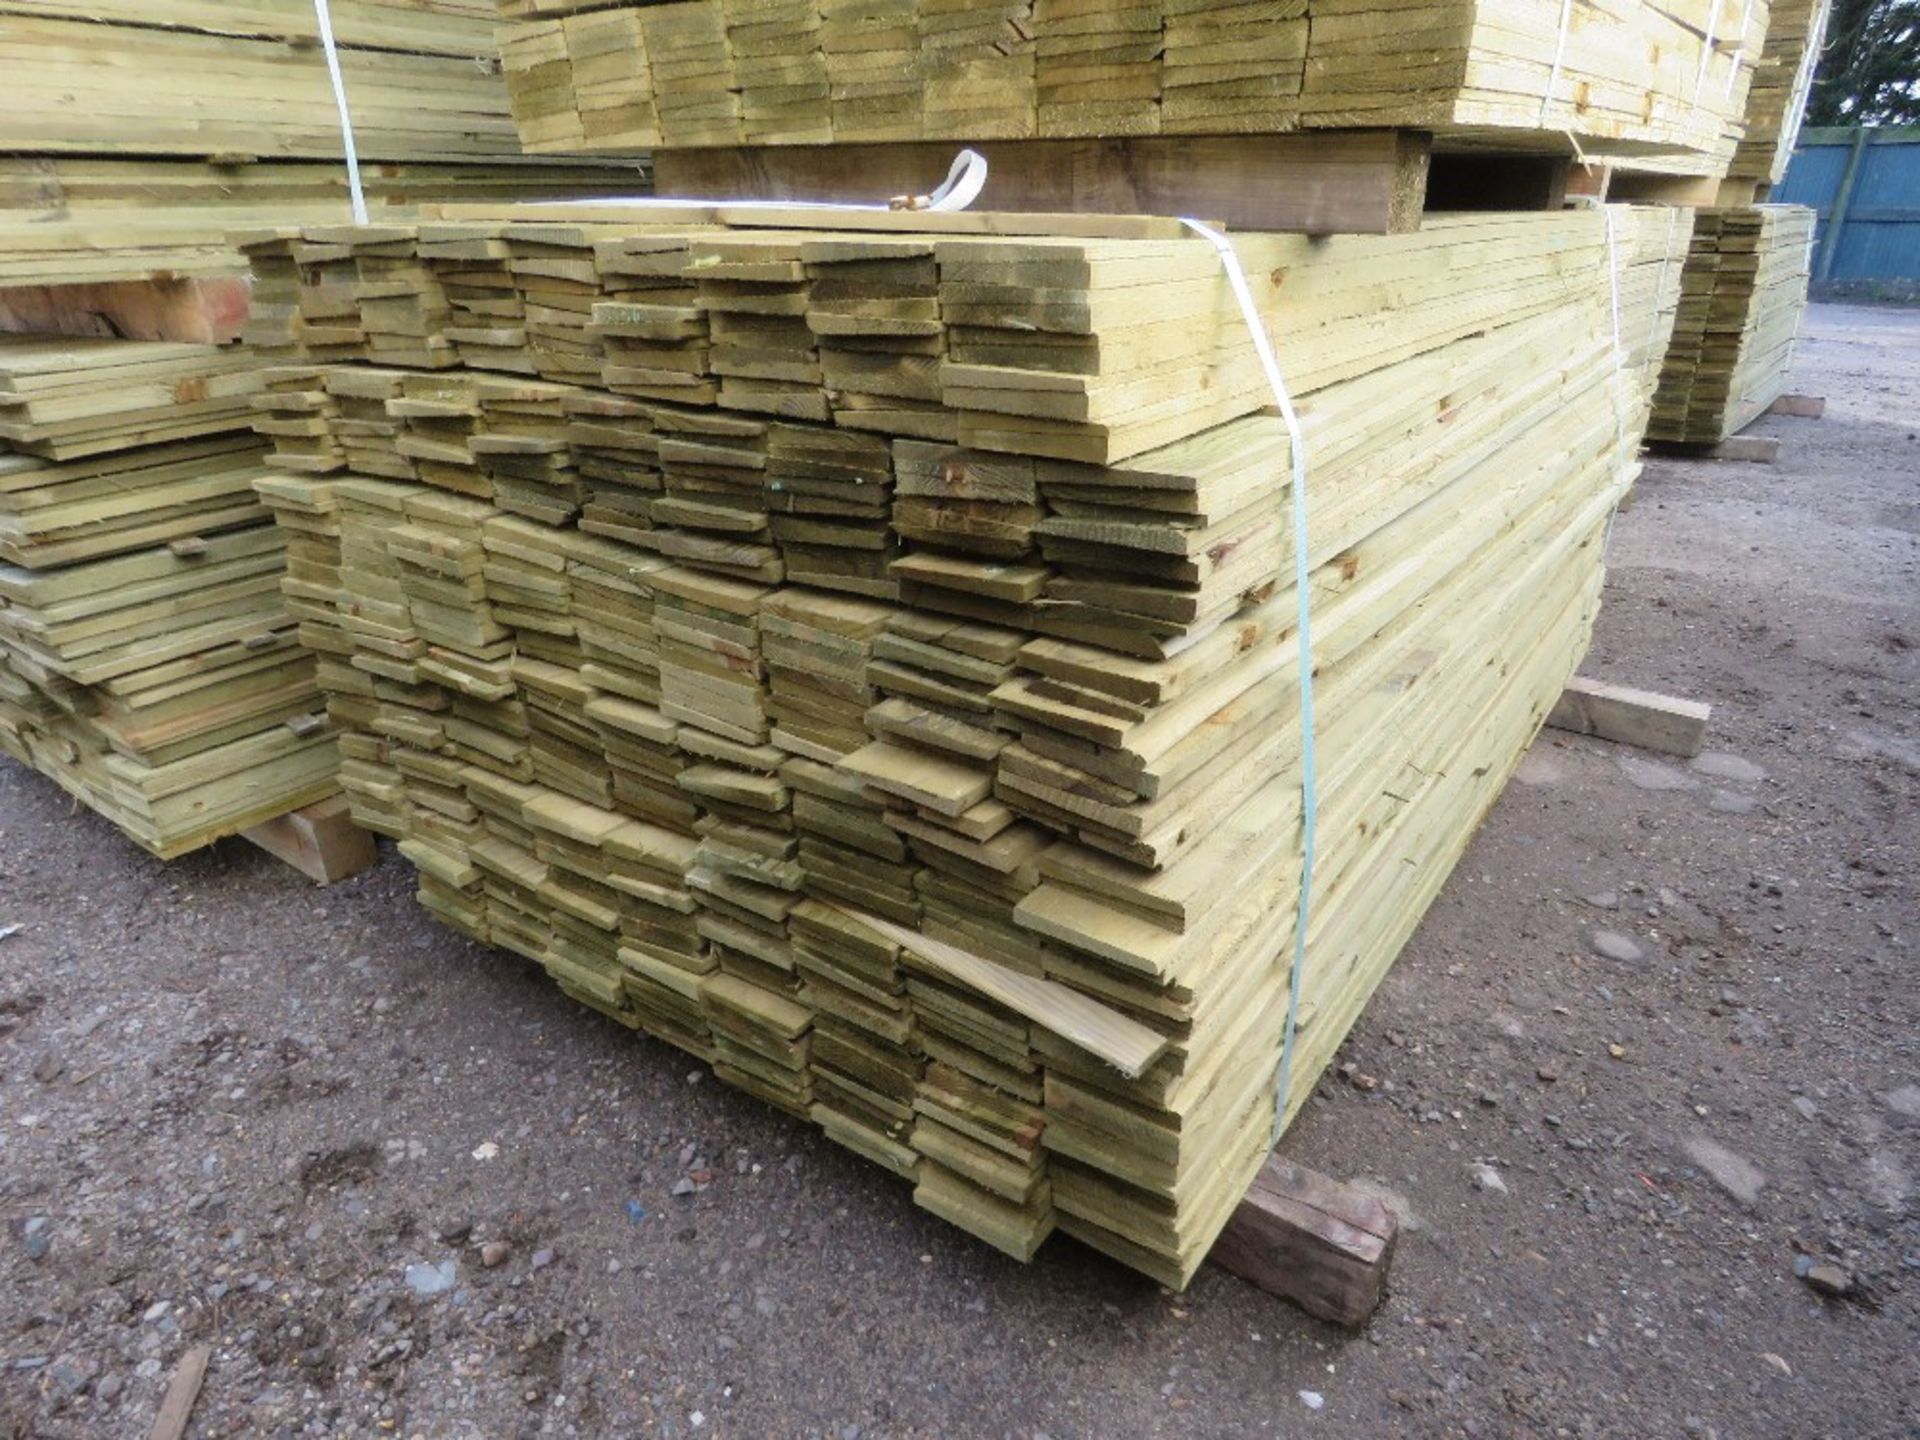 LARGE PACK OF PRESSURE TREATED FEATHER EDGE TIMBER CLADDING BOARDS. 1.60M LENGTH X 100MM WIDTH APPRO